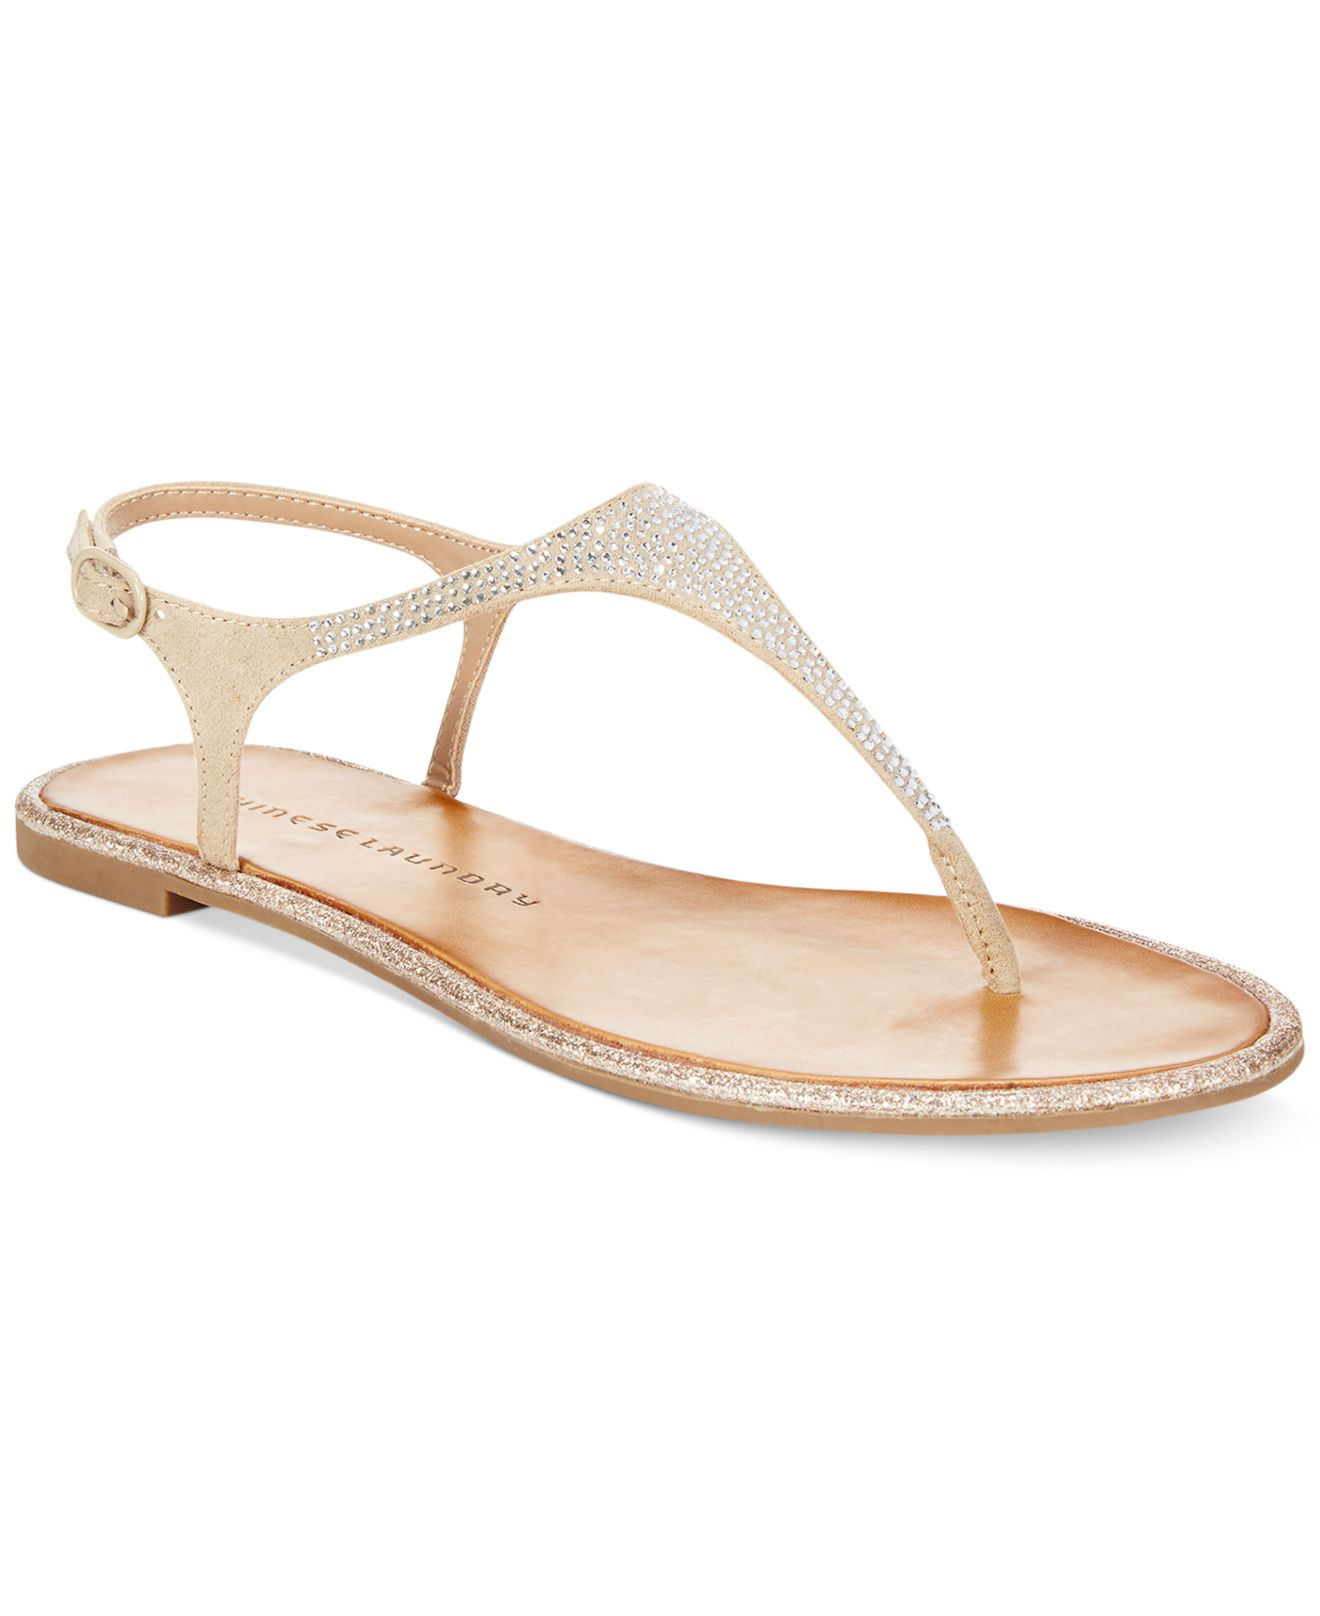 Lyst - Chinese Laundry Glam Rock Flat Thong Sandals in Natural